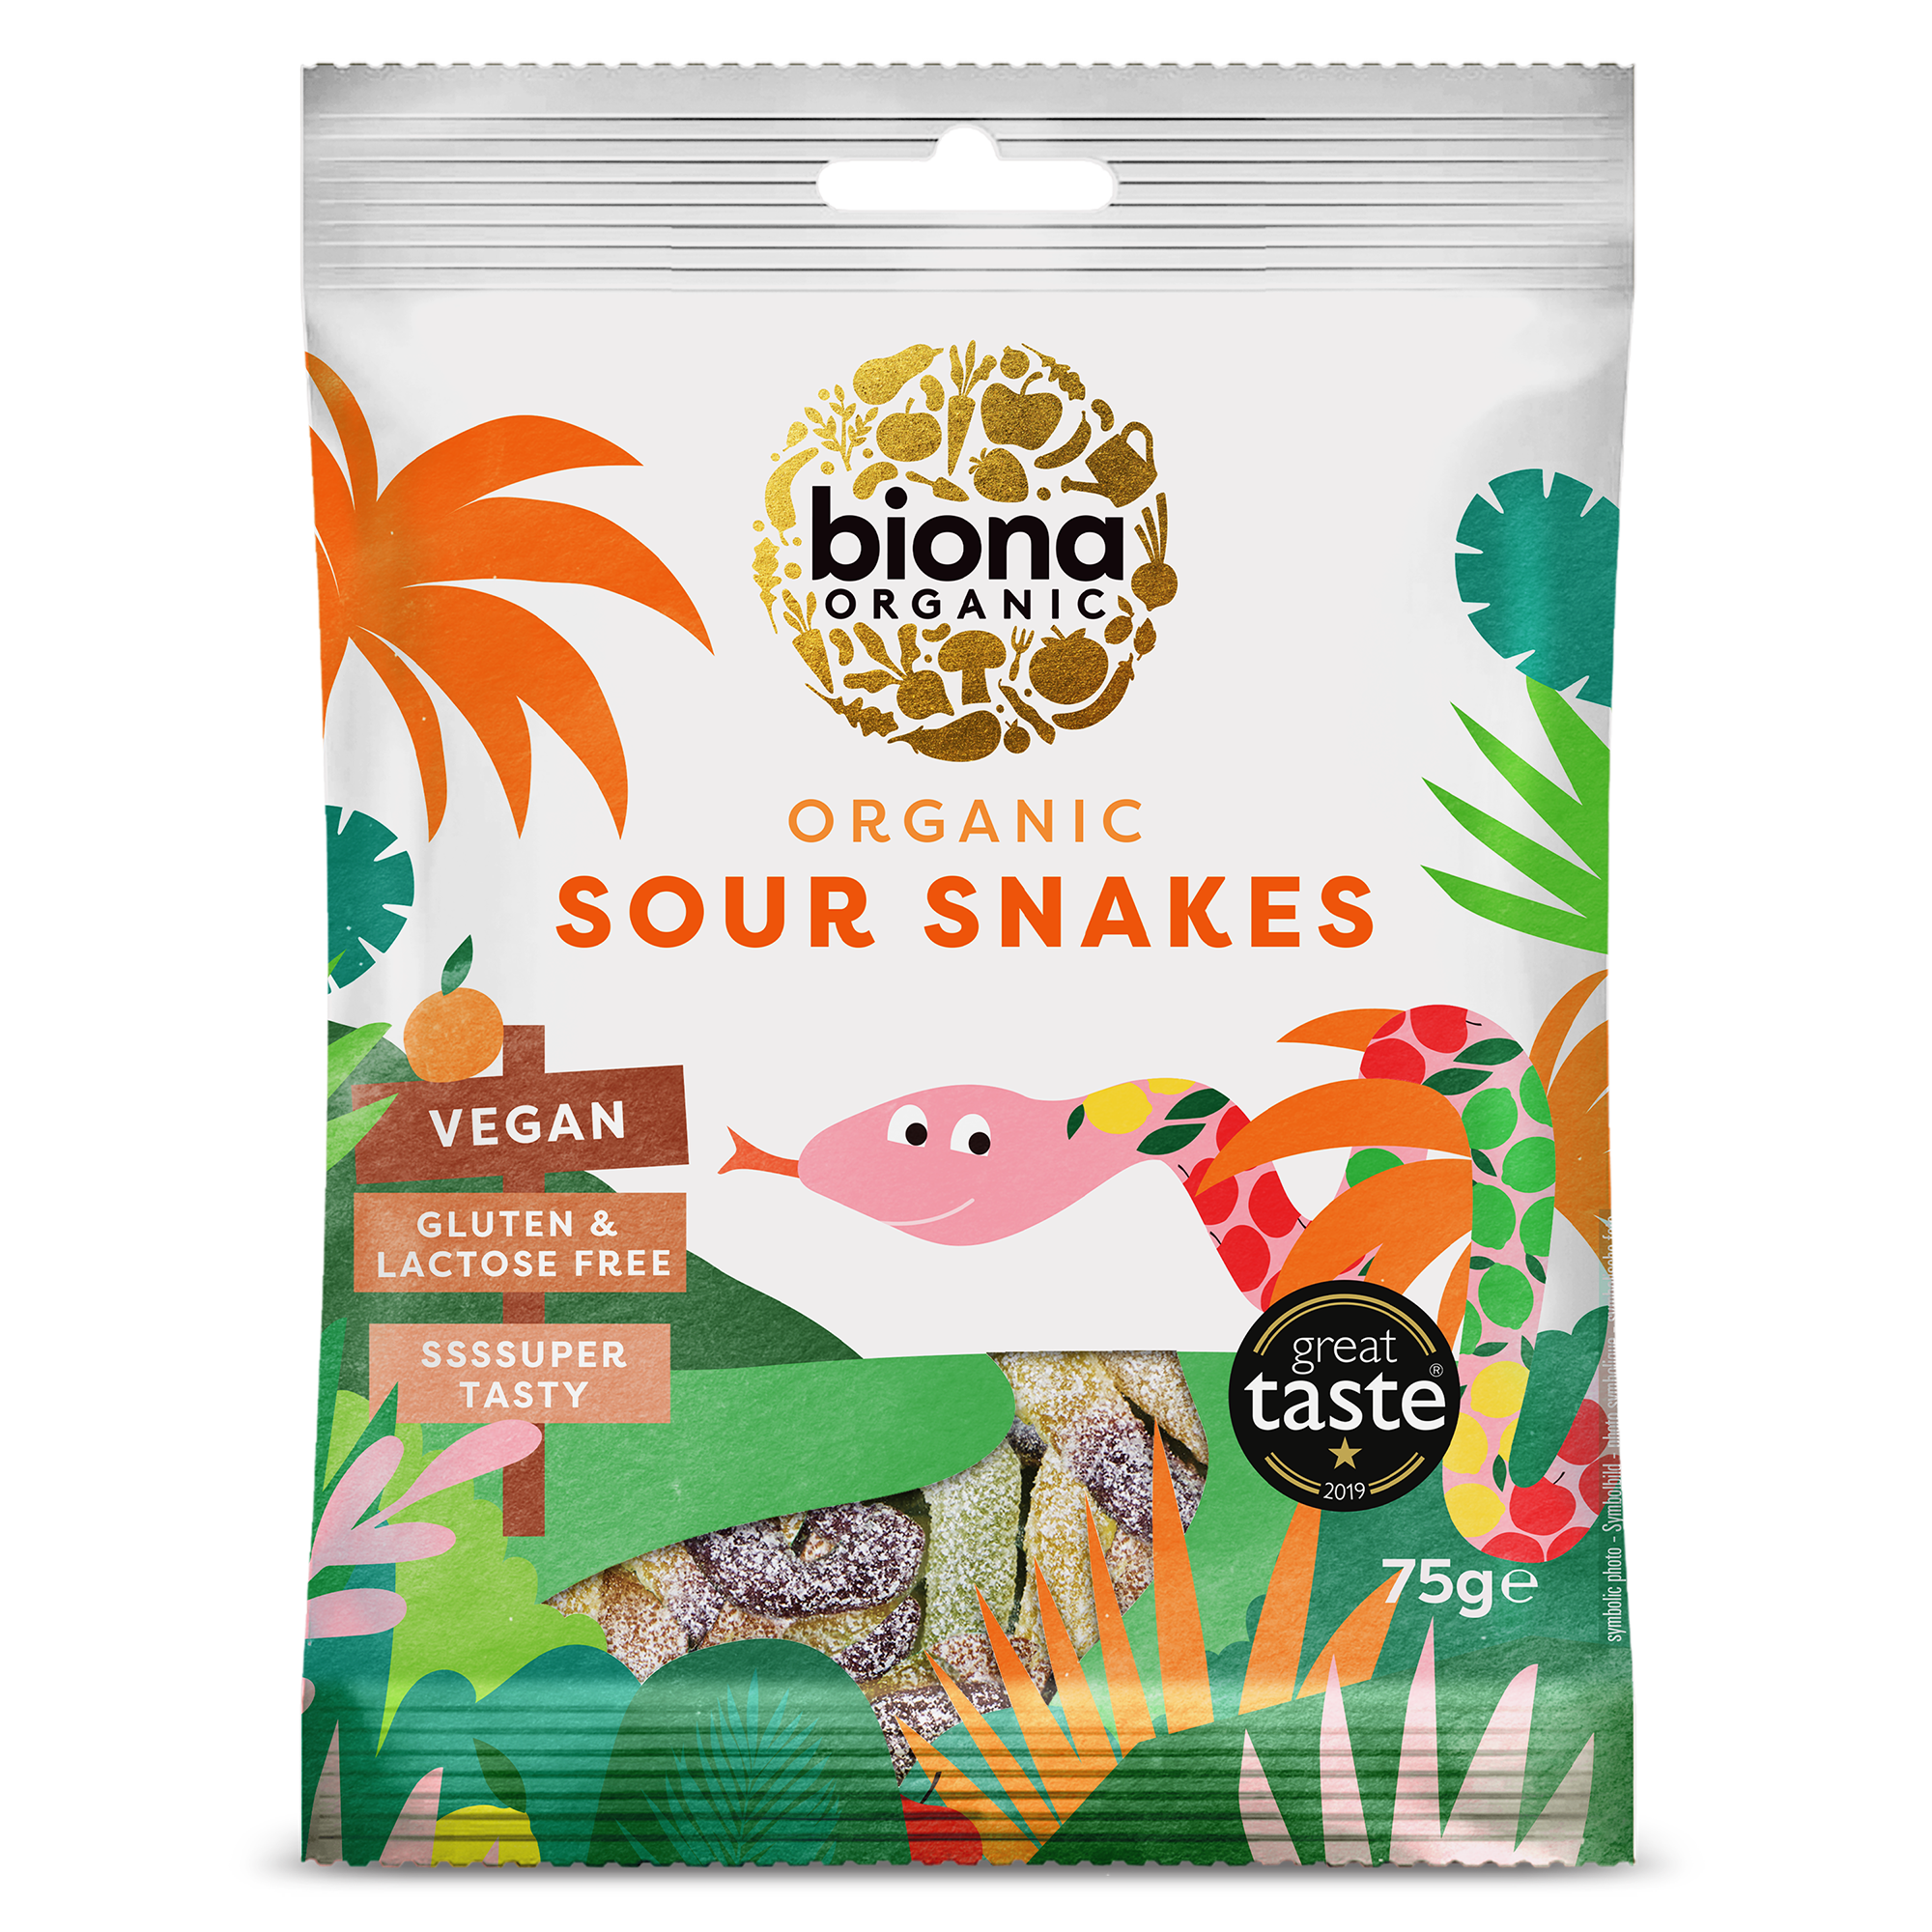 SOUR SNAKES